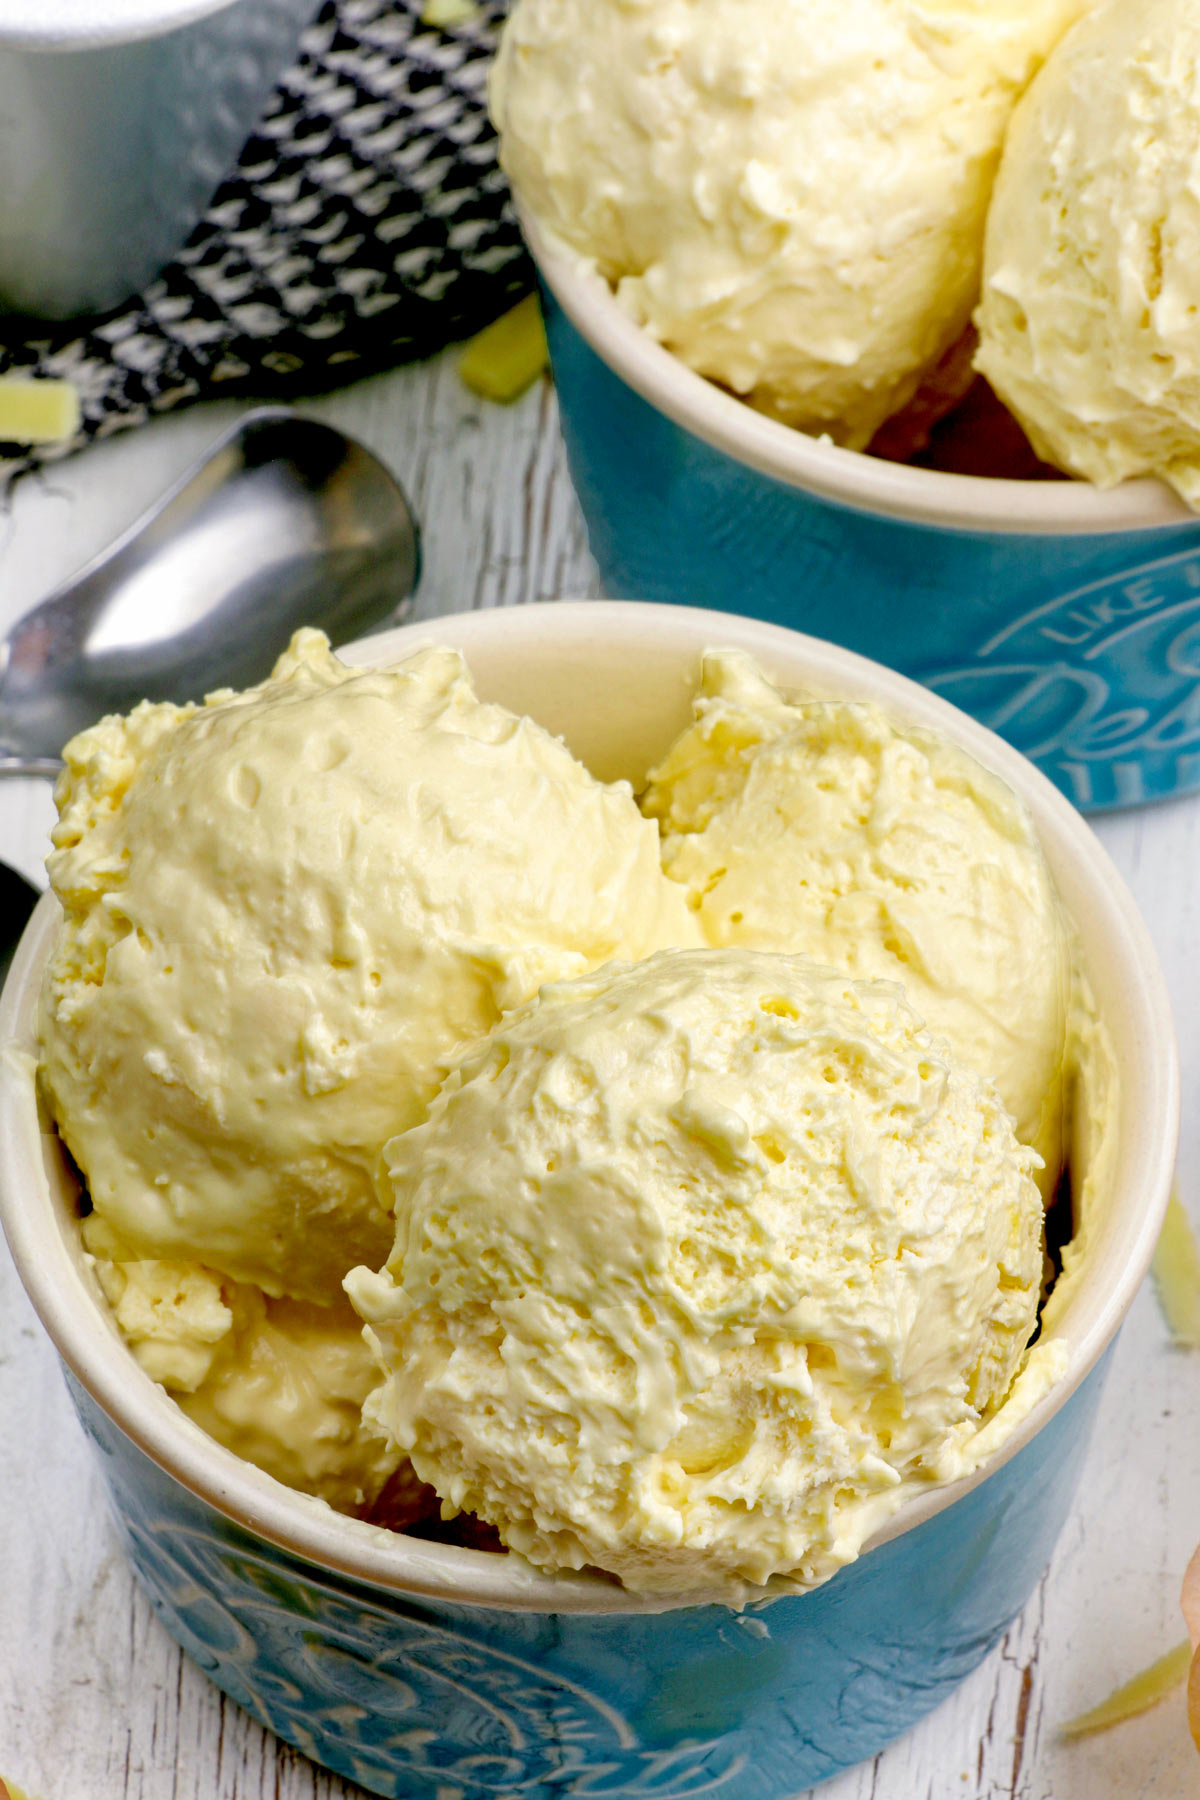 Scoops of sweet and salty homemade Cheese ice cream in dessert bowls.